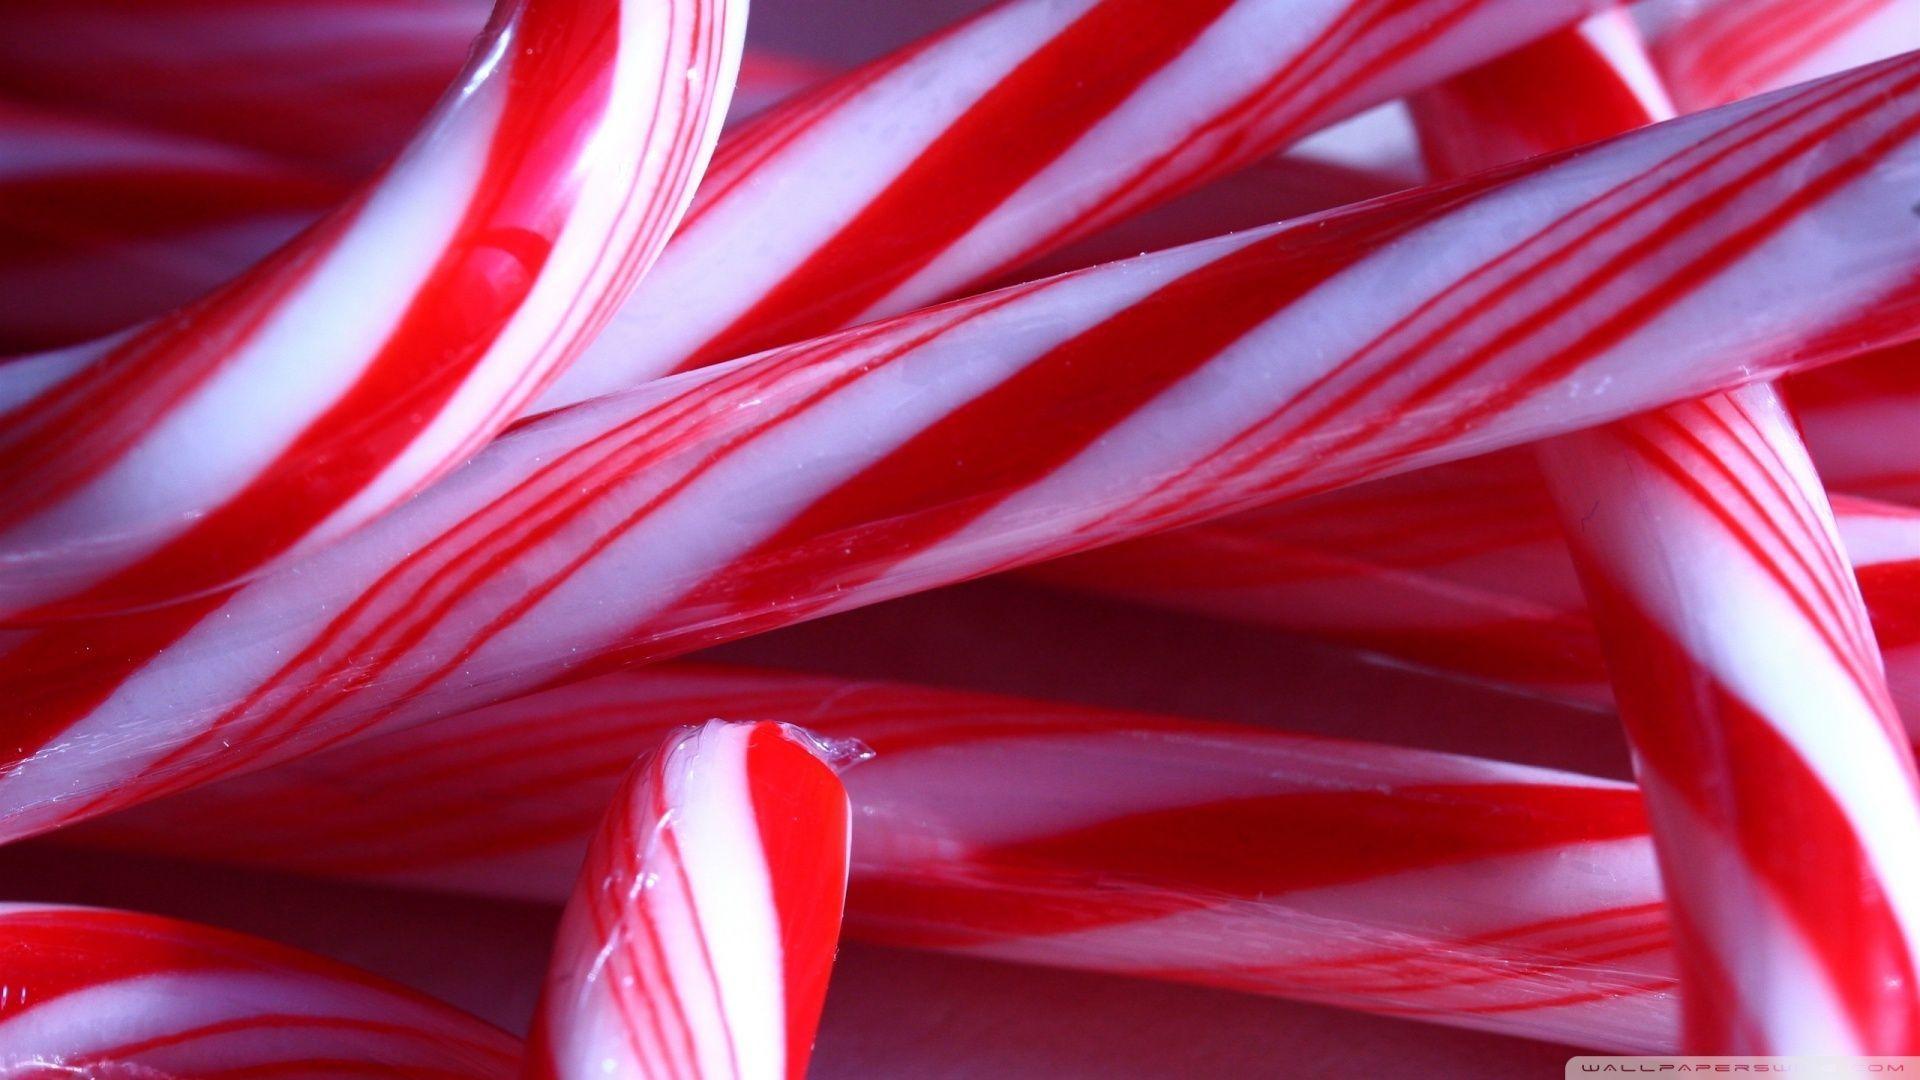 Download Candy Canes Wallpapers 1920x1080